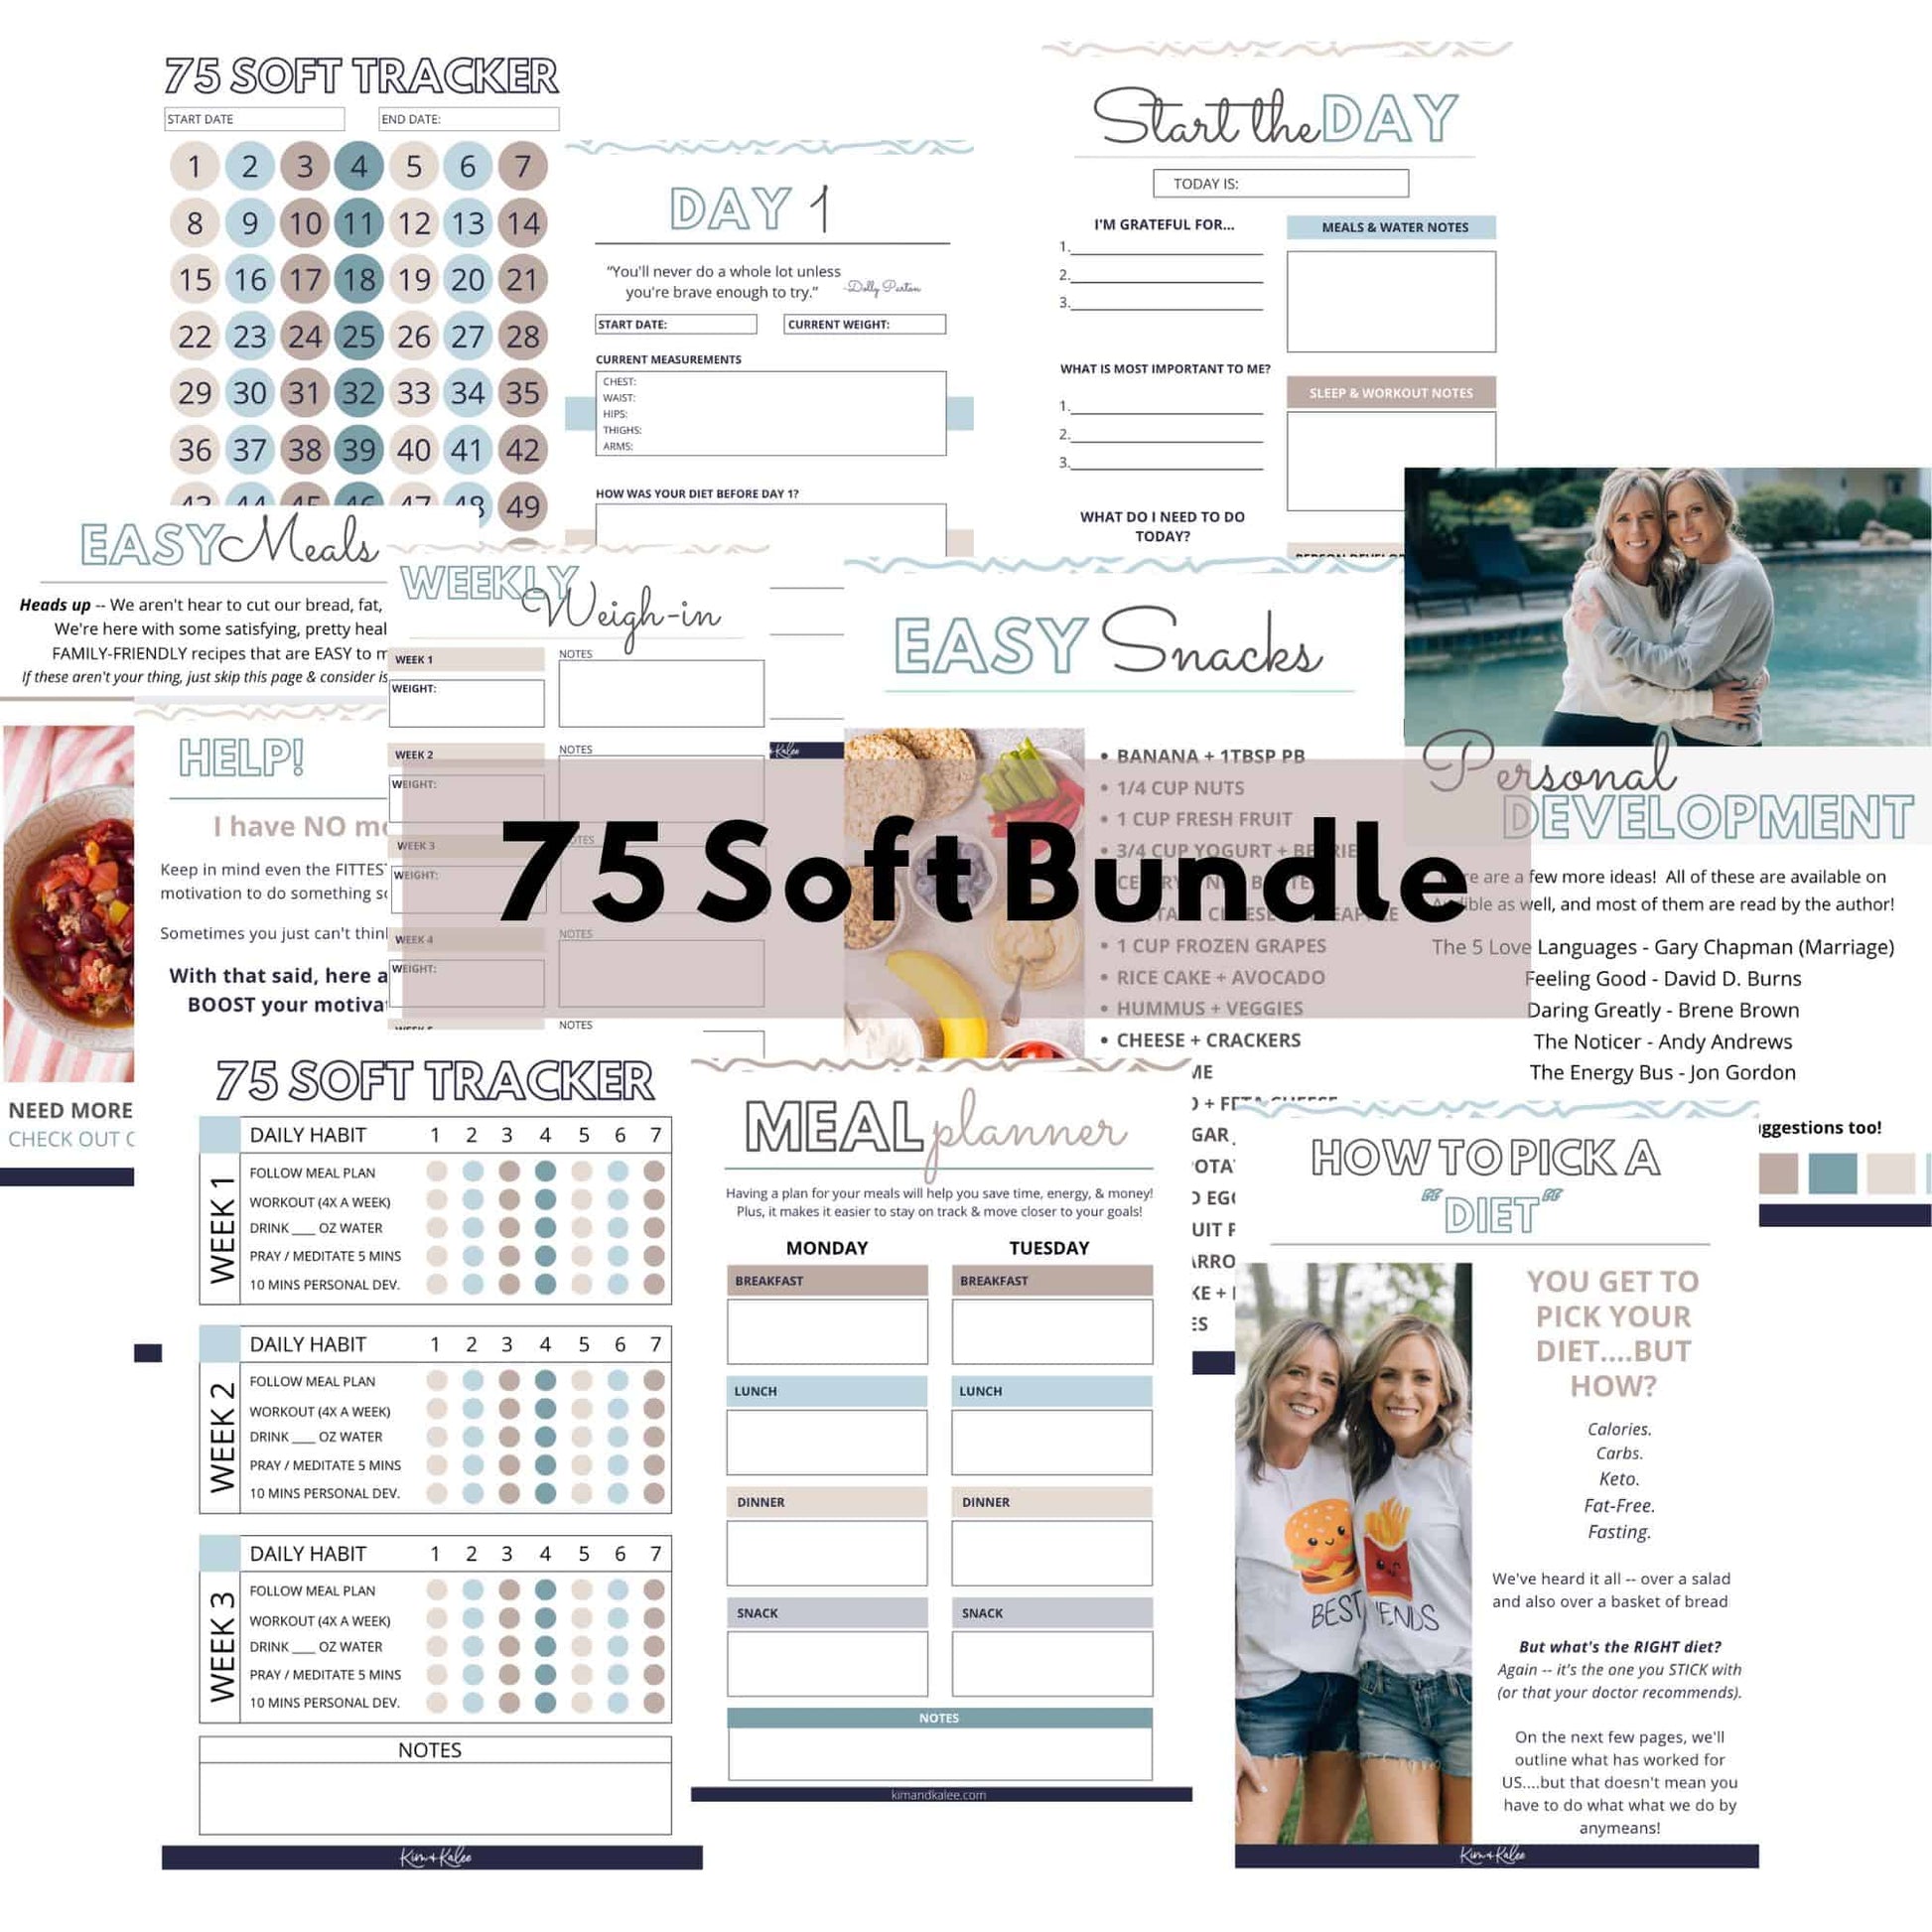 Sample of the 75 Soft Challenge PDF Printable Book including a 75 Soft Tracker, daily planner, easy meal plan ideas, recipes, and how to pick a diet.